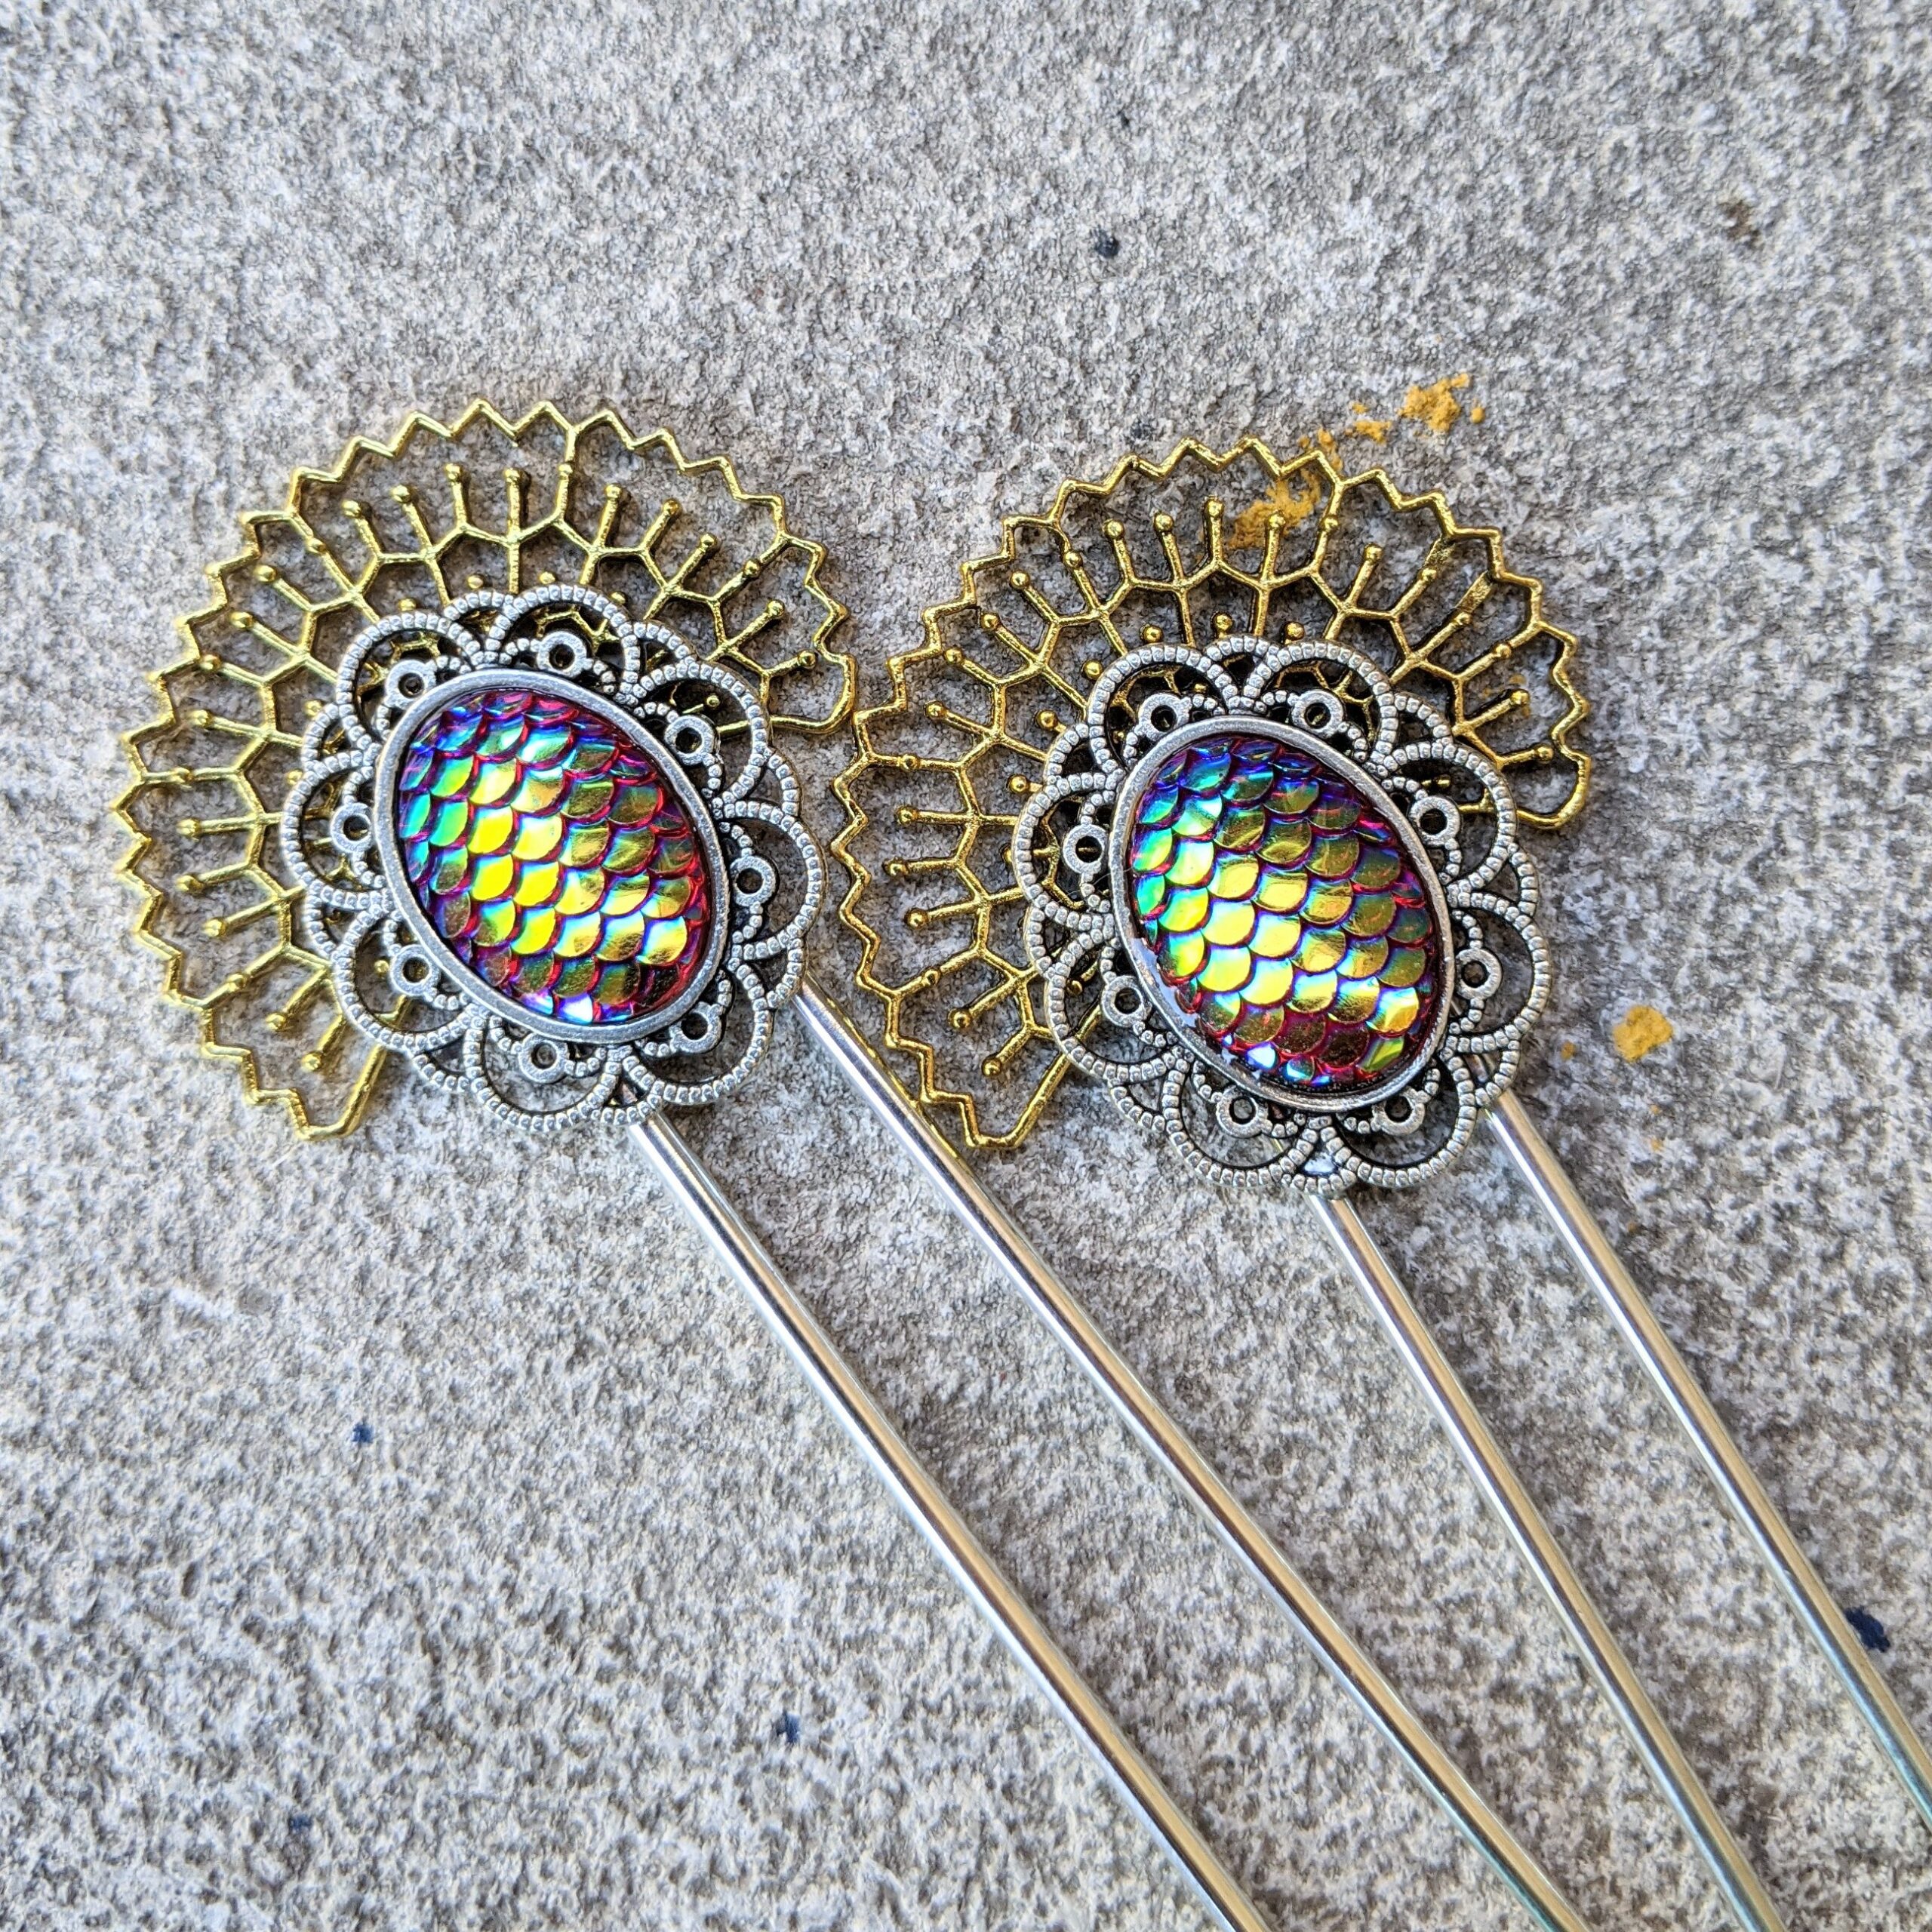 fusion lace hair forks with scale cabochons - A Case of Random